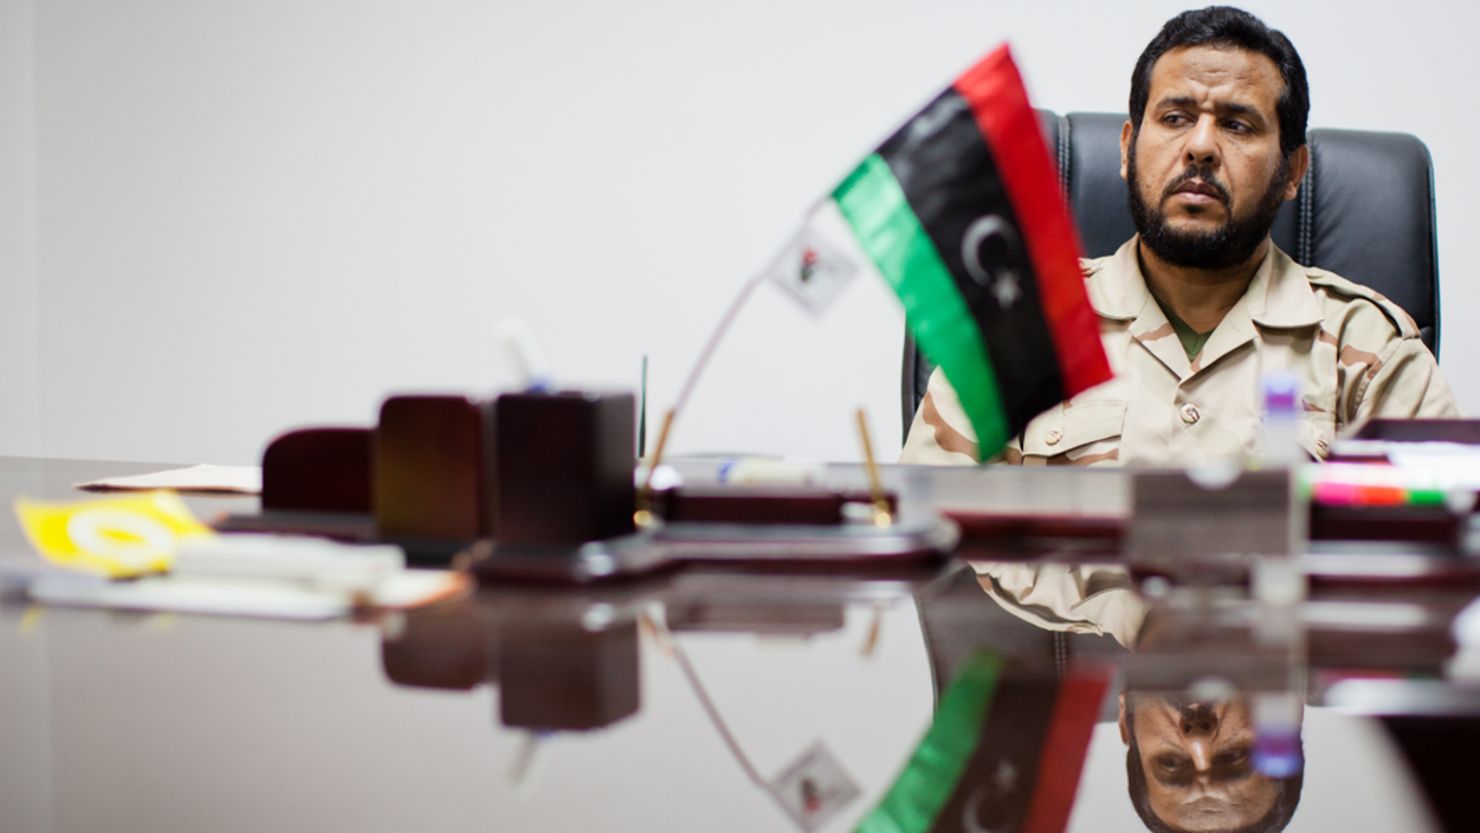 Abdul Hakim Belhaj, commander of the Tripoli Military Council, pictured during an interview in September 2011.